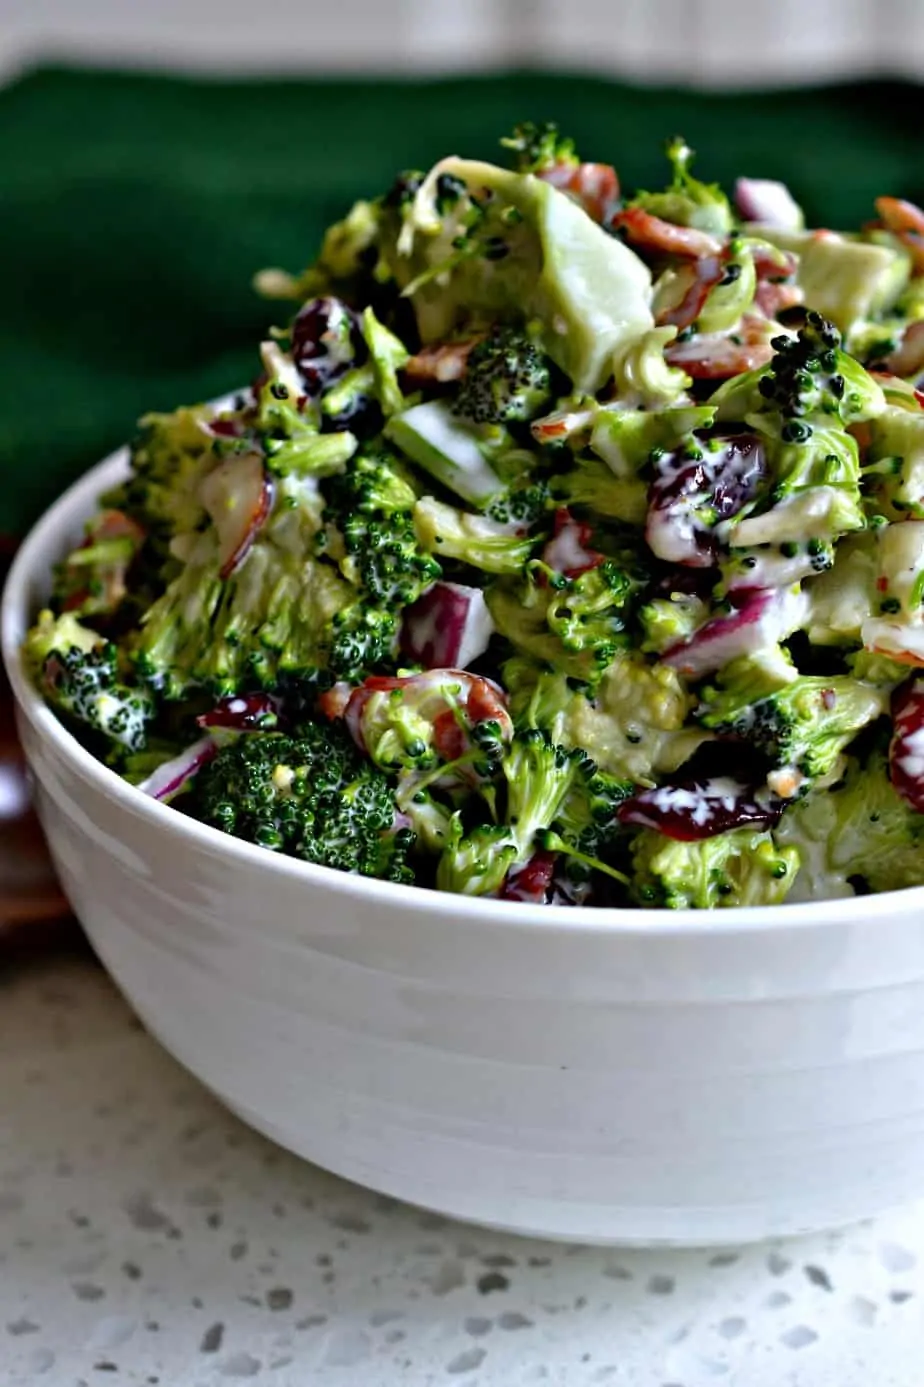 A broccoli salad made with bacon, onions, almonds, dried cranberries and a lightly sweetened easy four ingredient dressing.